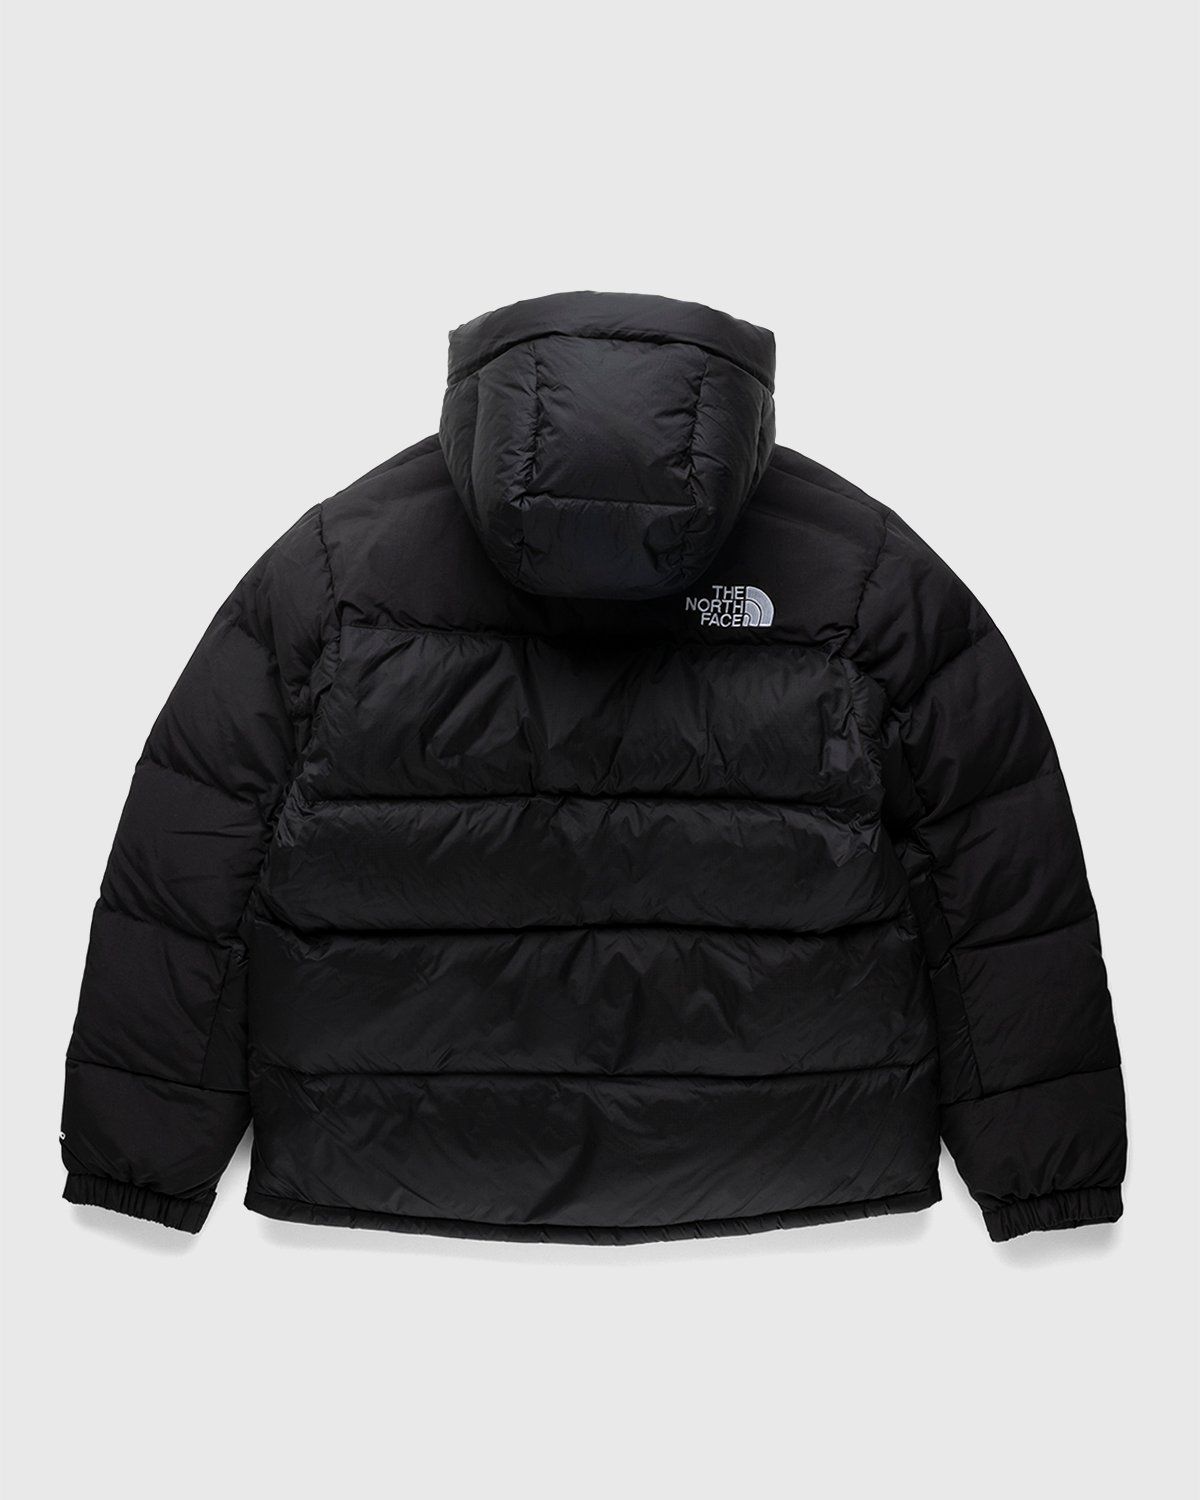 The North Face – Himalayan Down Parka Black | Highsnobiety Shop